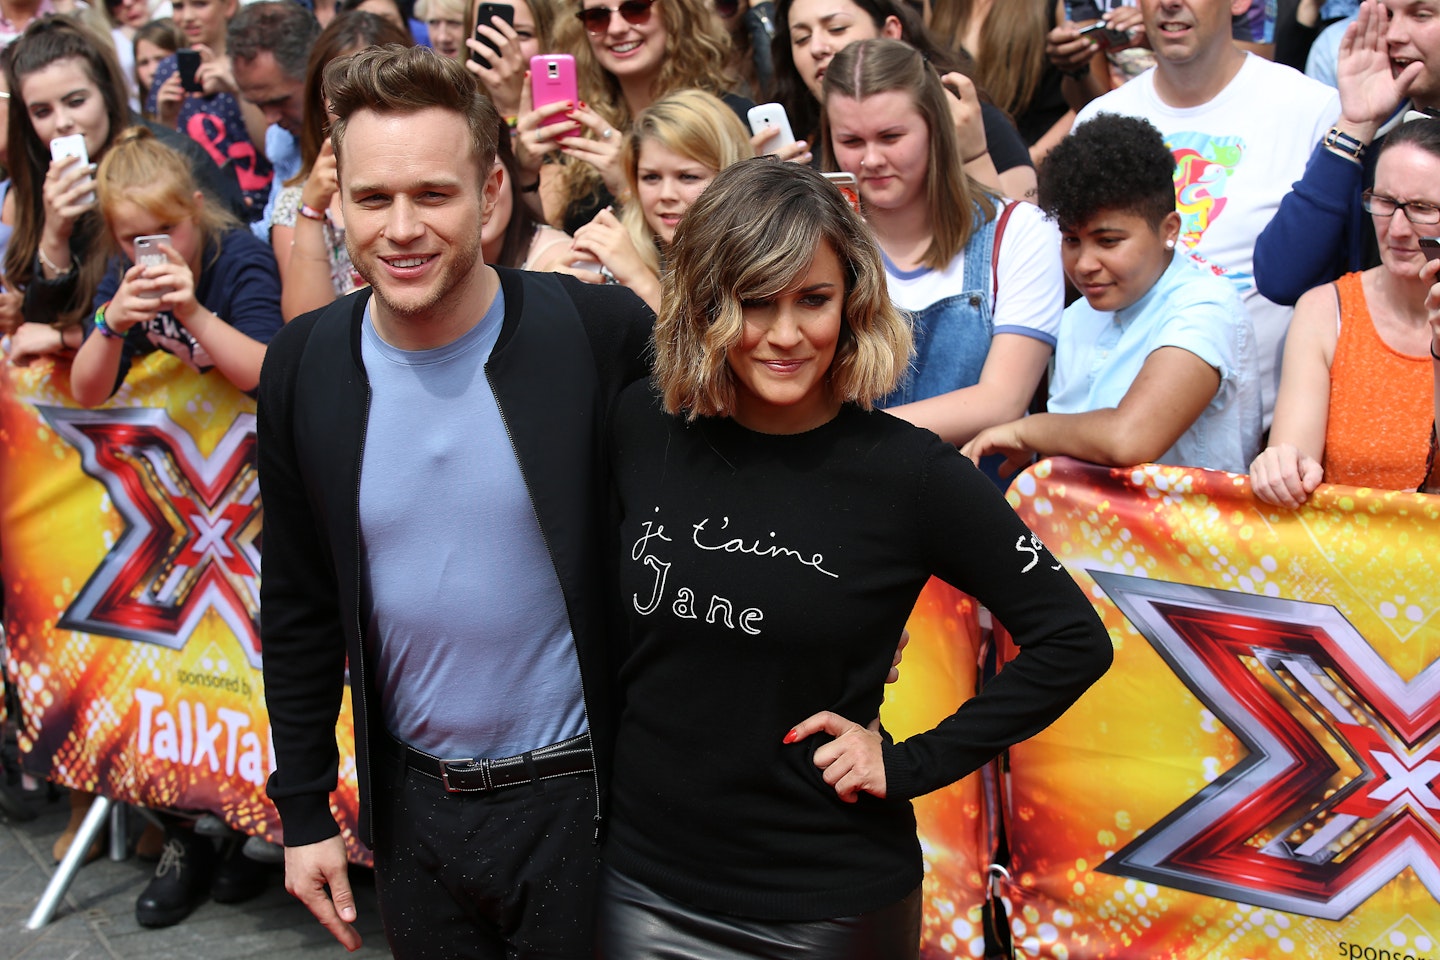 Olly used to present The X Factor with co-host Caroline Flack